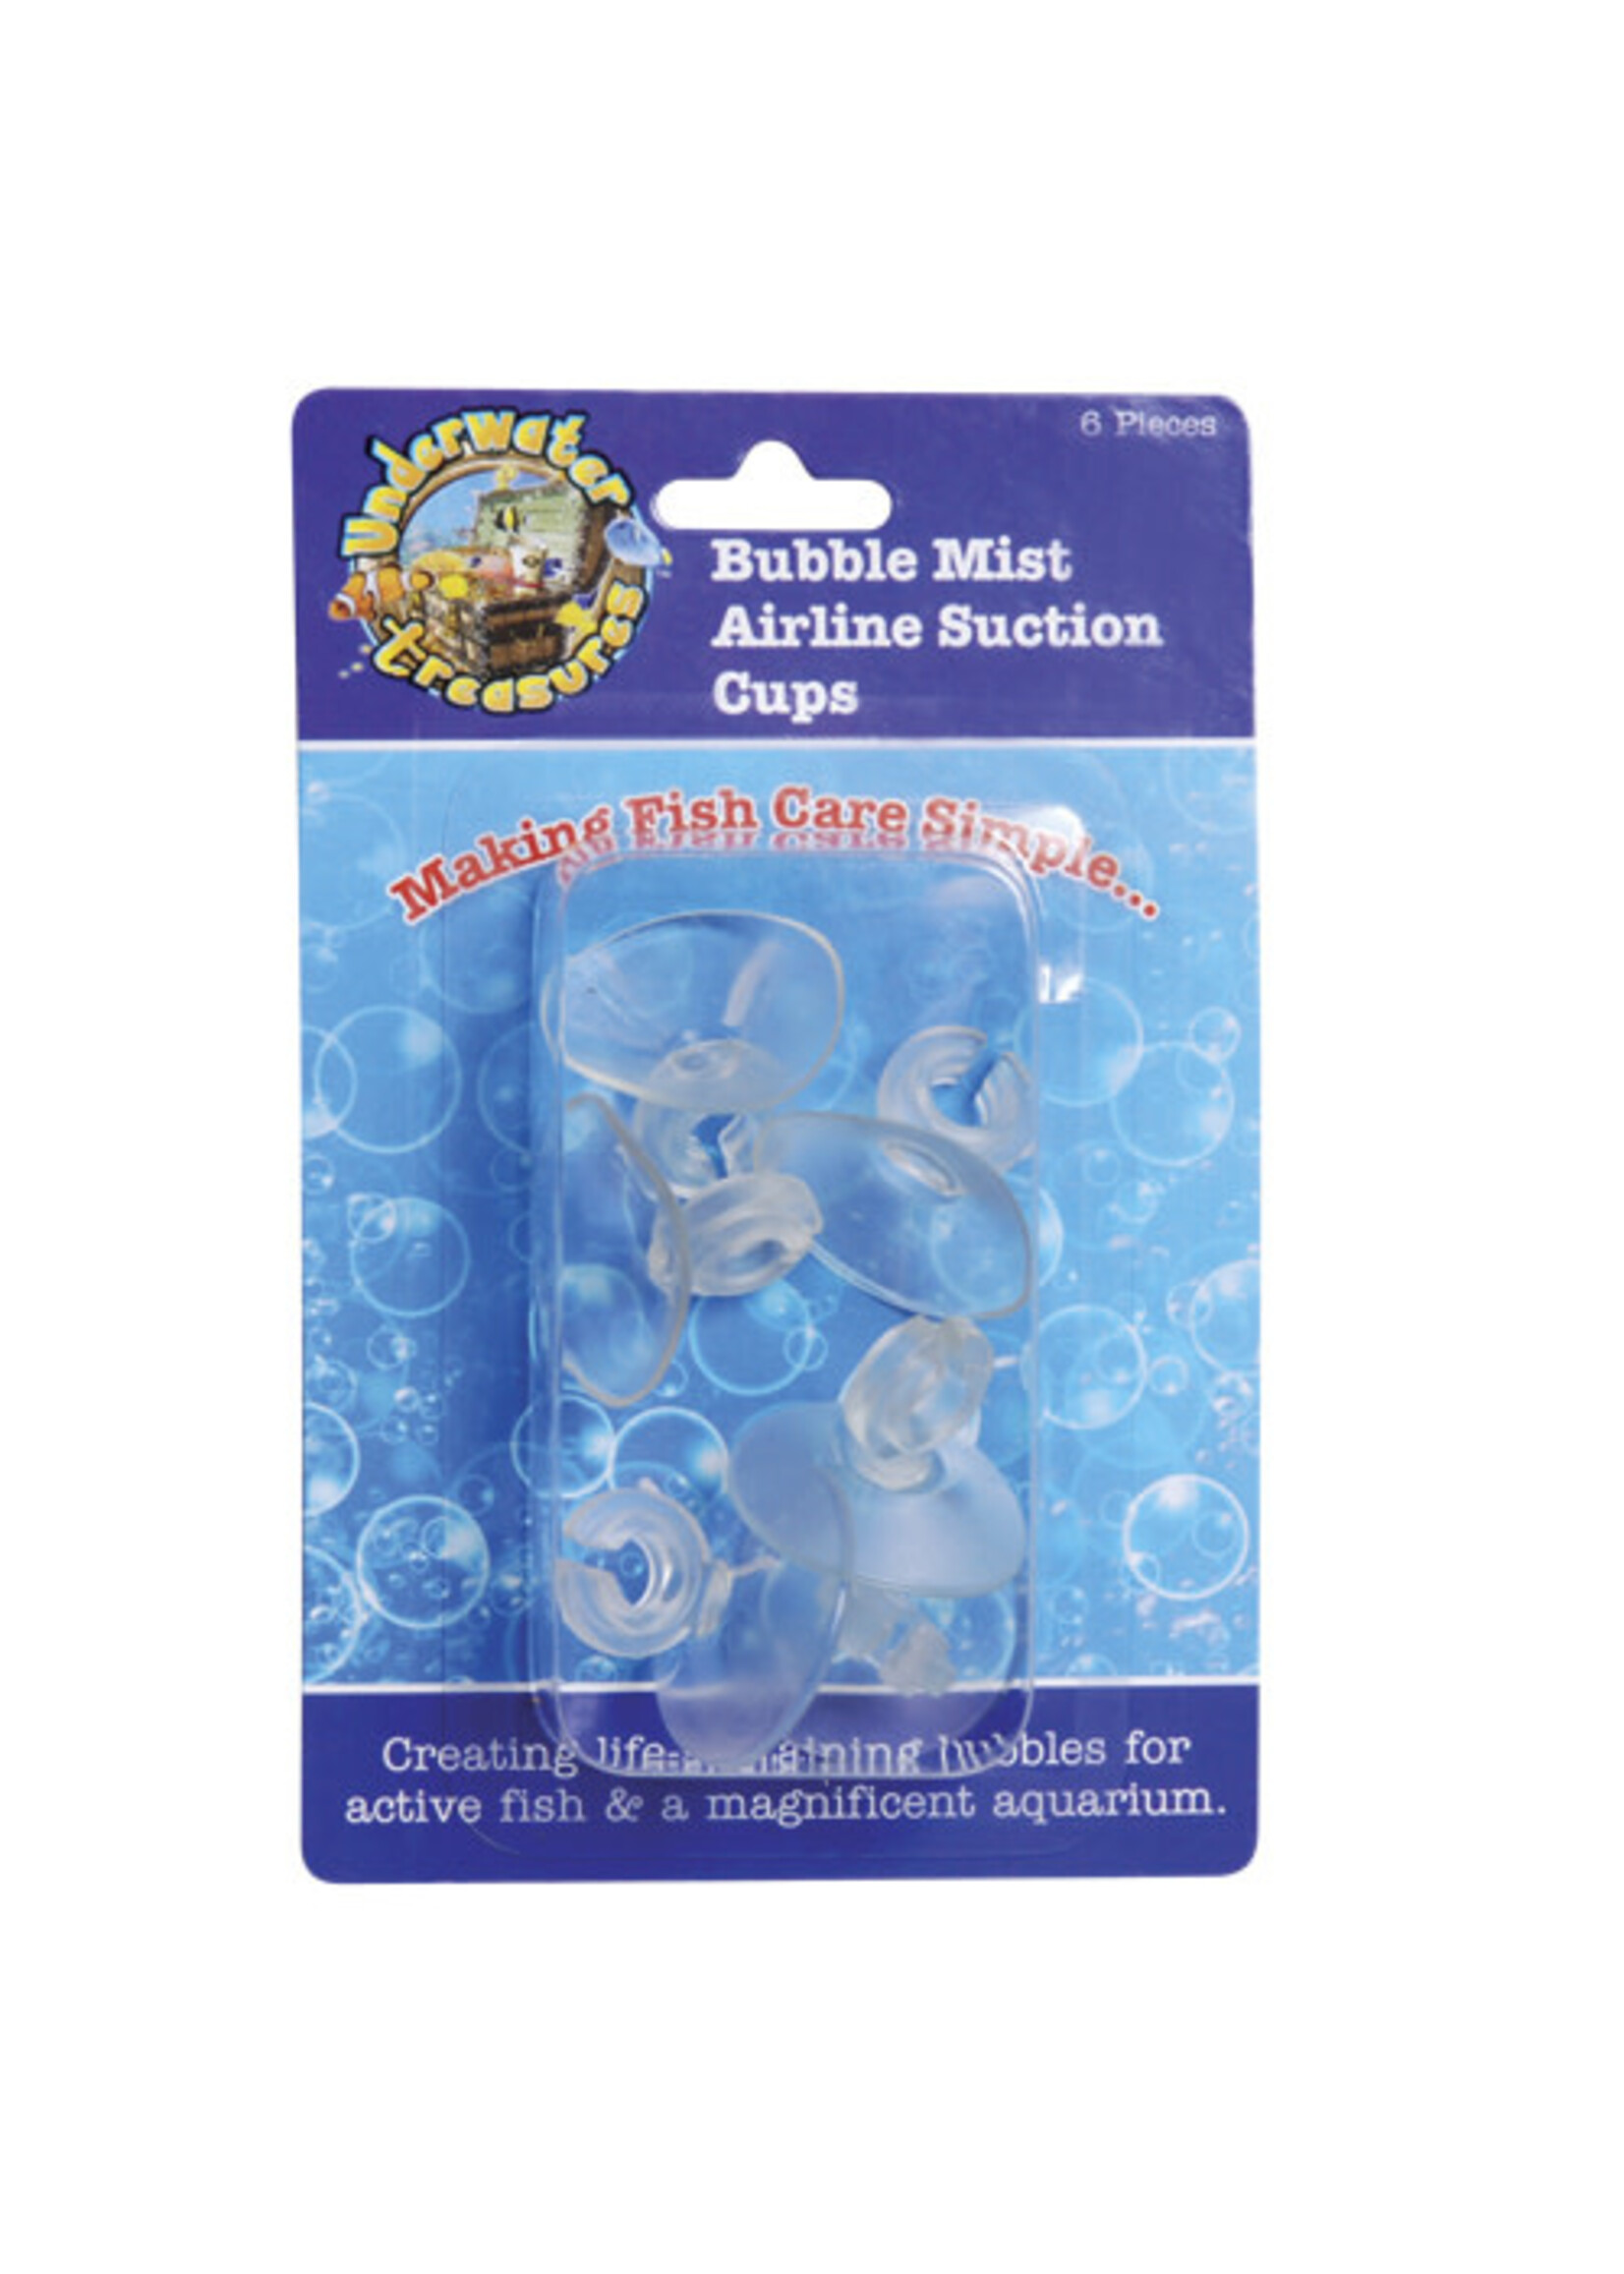 Underwater Treasures BUBBLE MIST AIRLINE SUCTION CUPS